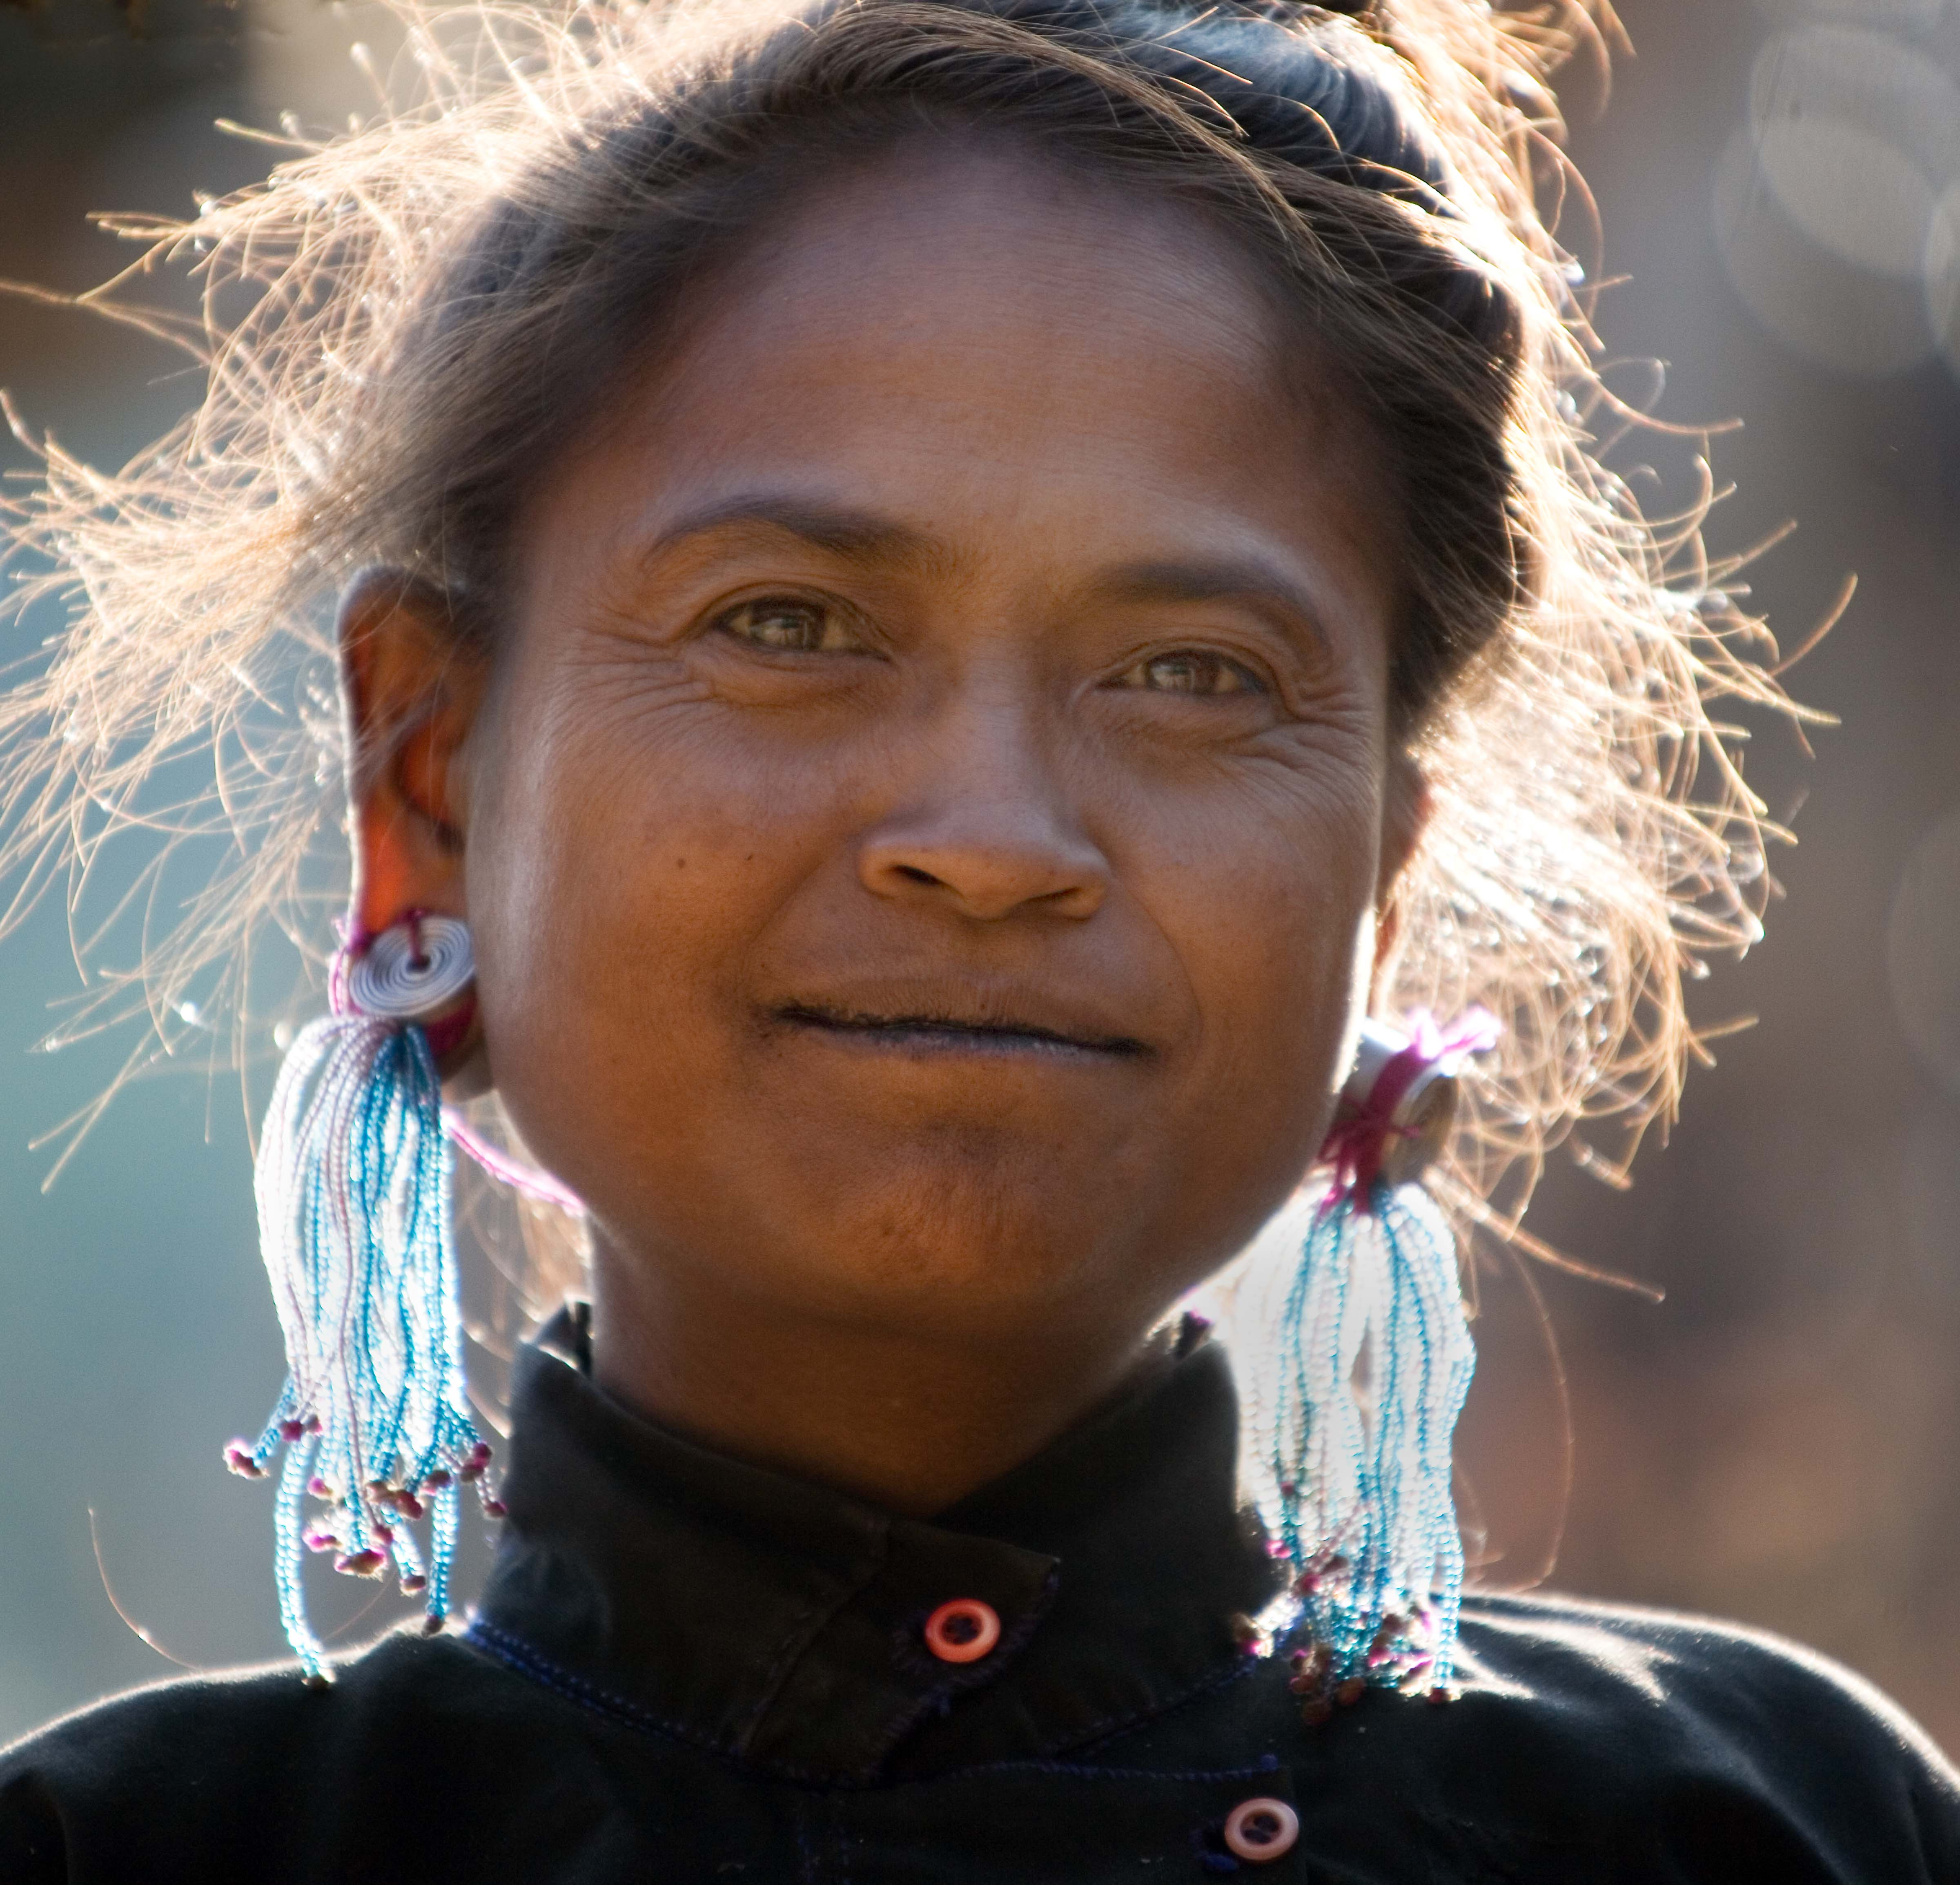 Eng Woman with Glass Bead Earrings in Sun